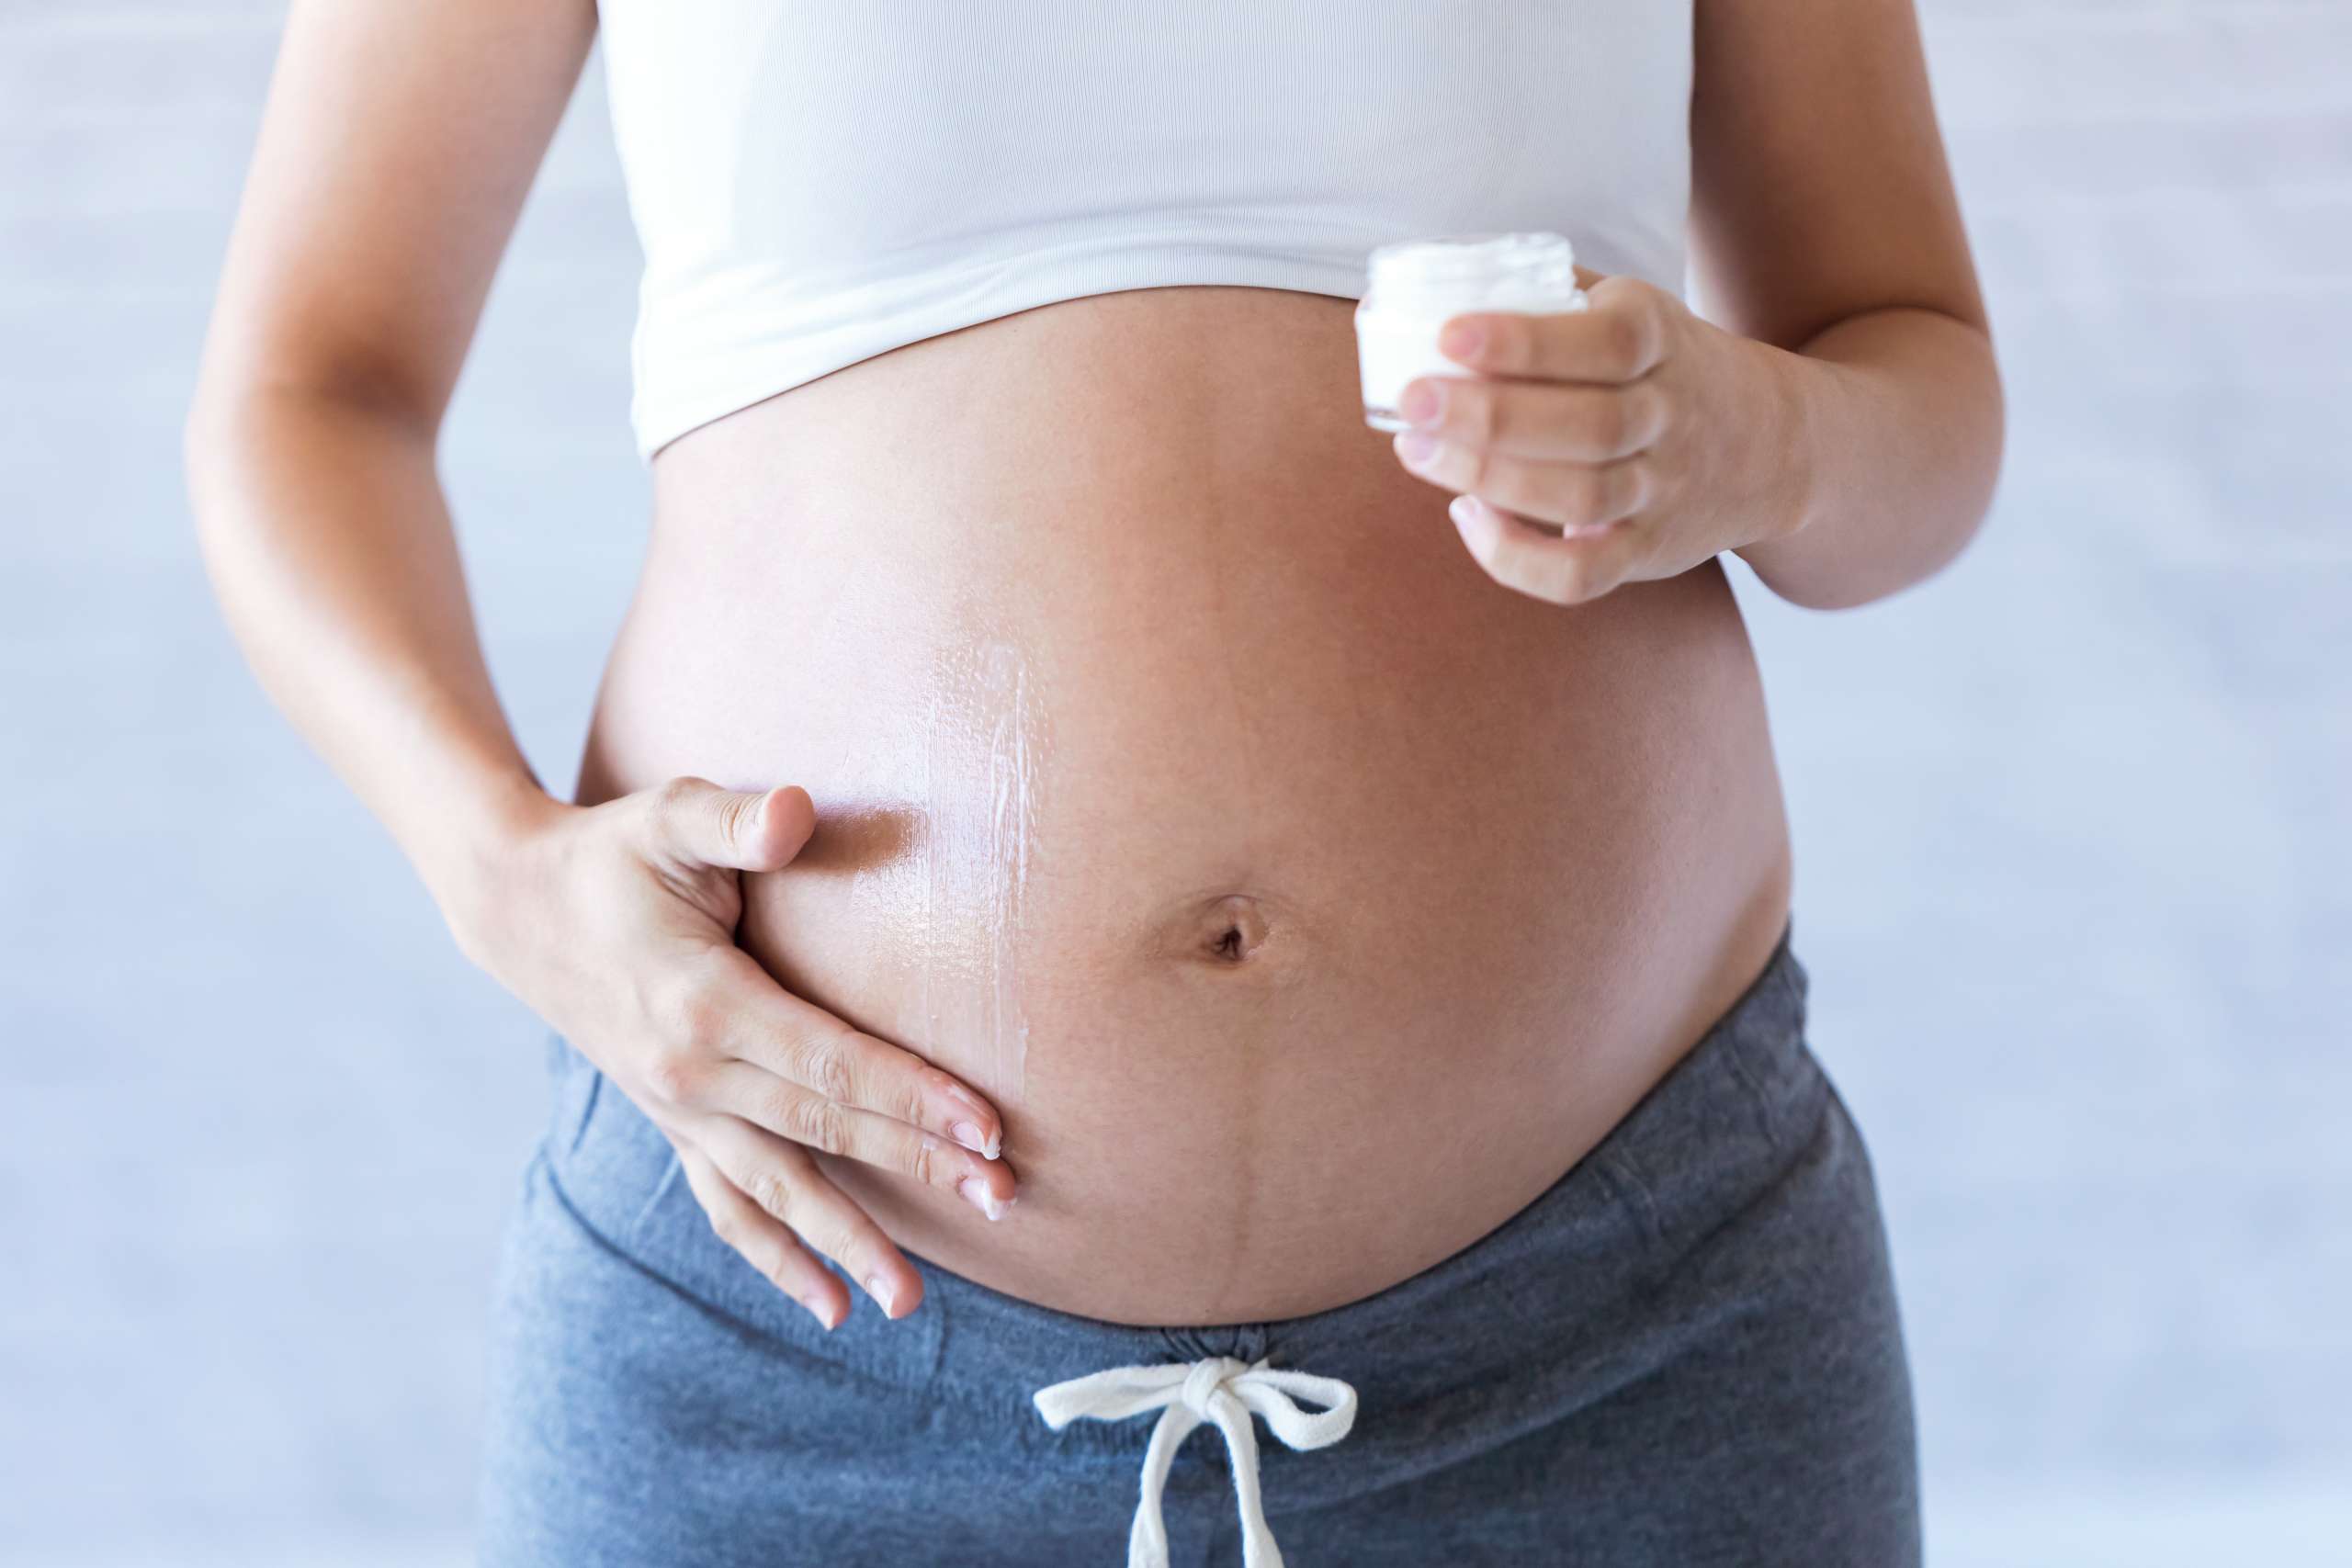 Pregnant woman applying cream lotion on pregnant belly to prevent stretch mark.